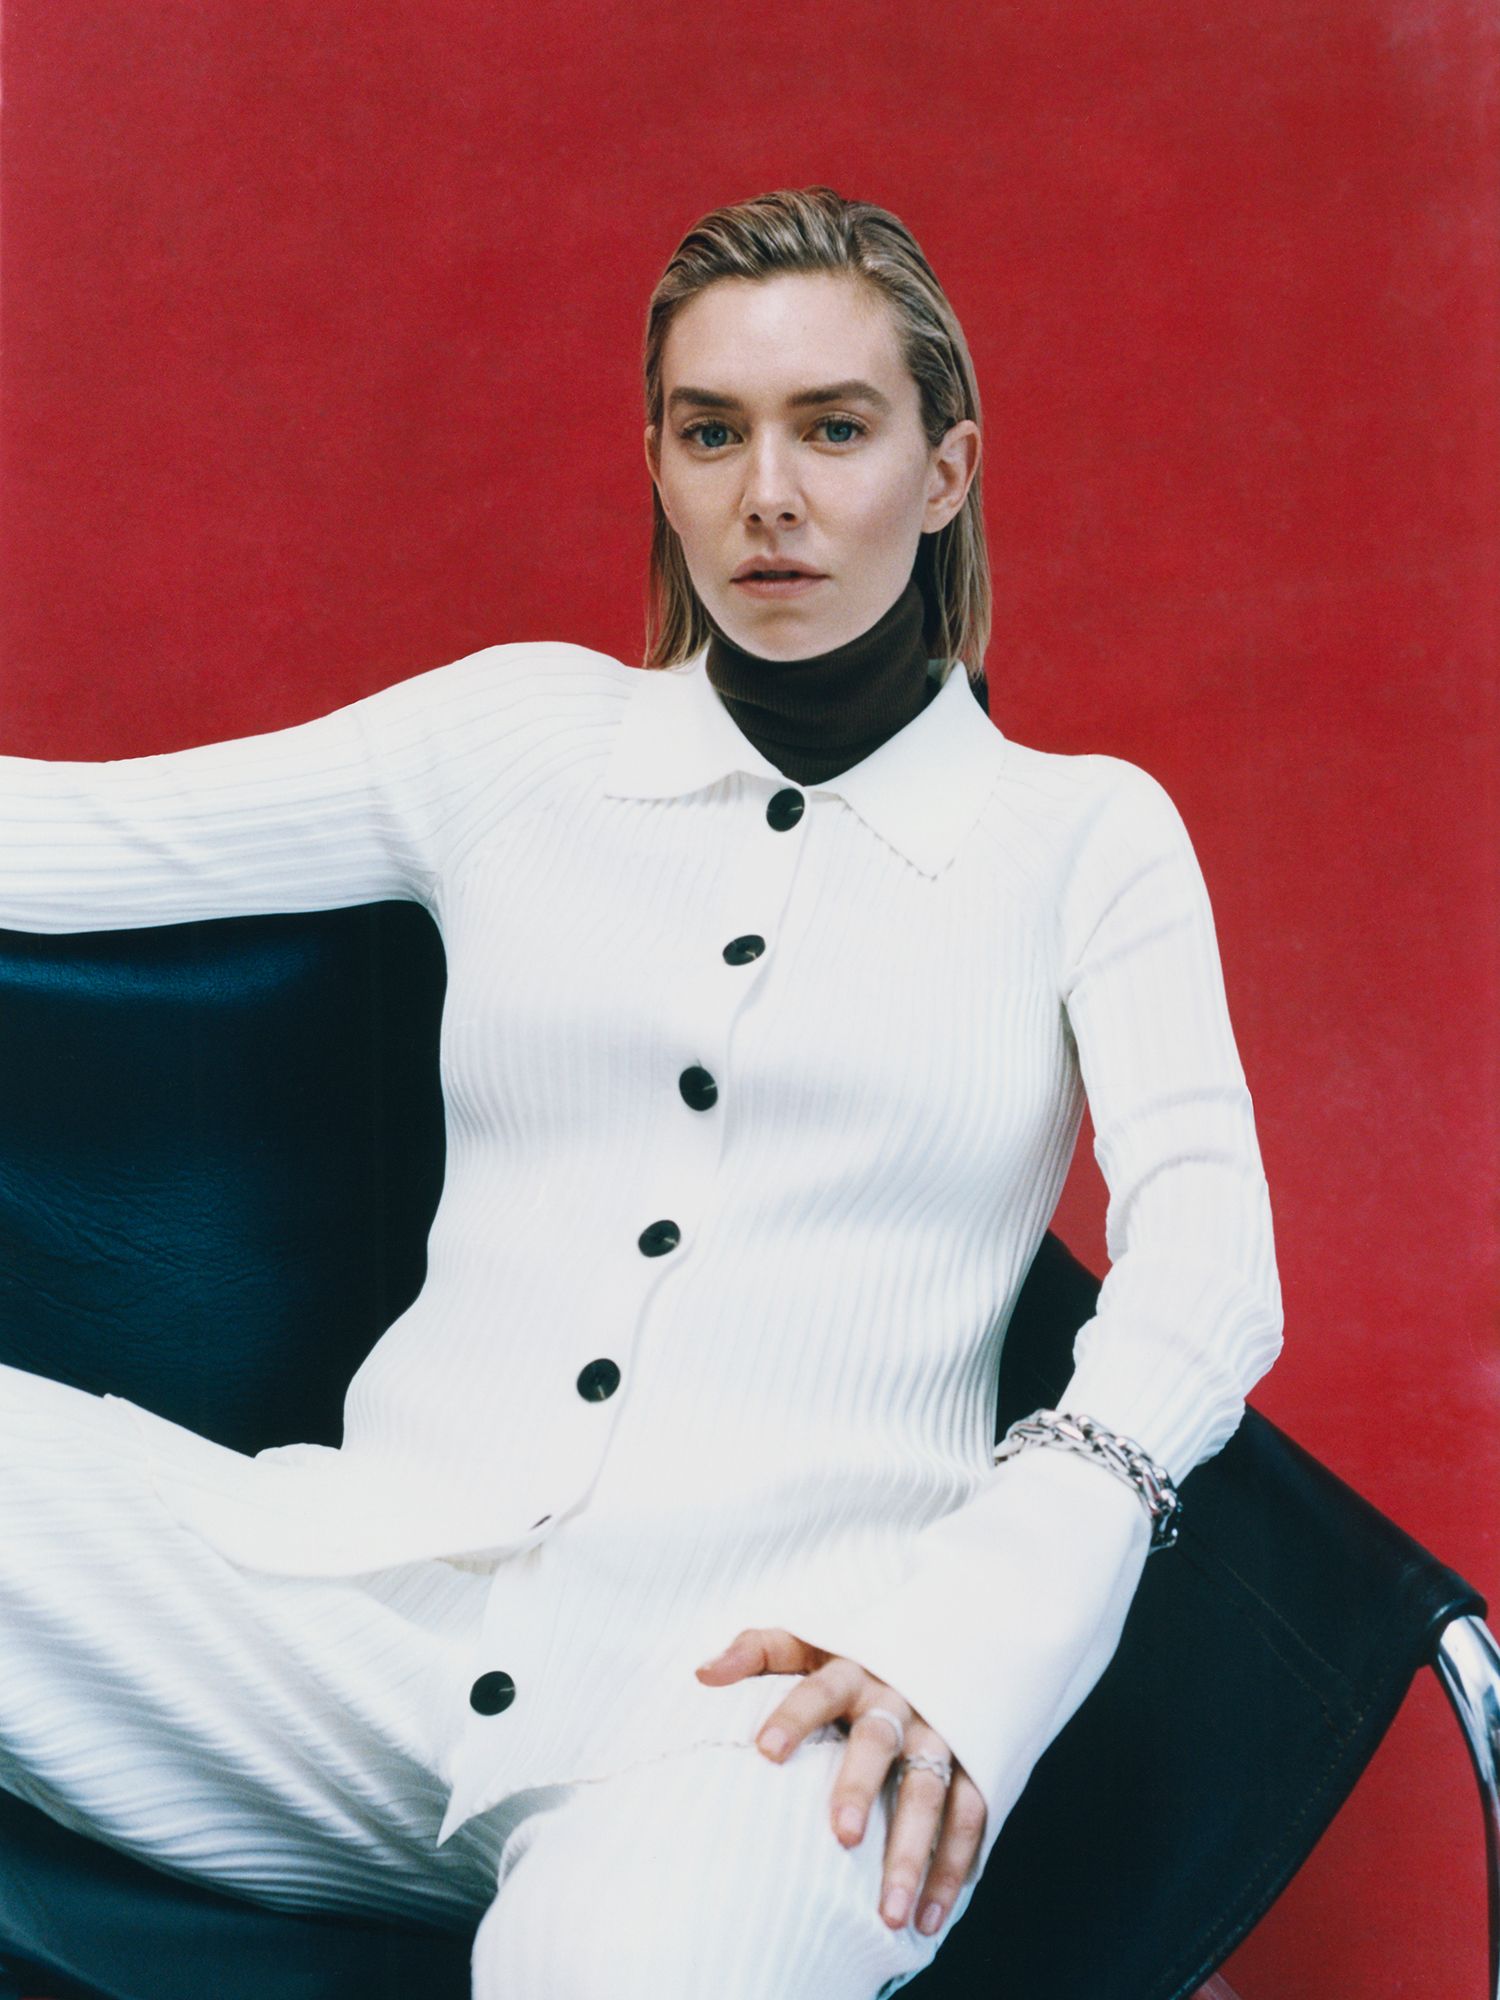 Vanessa-Kirby-by-Toby-Coulson-for-Porter-Magazine-April-2021-5.jpg